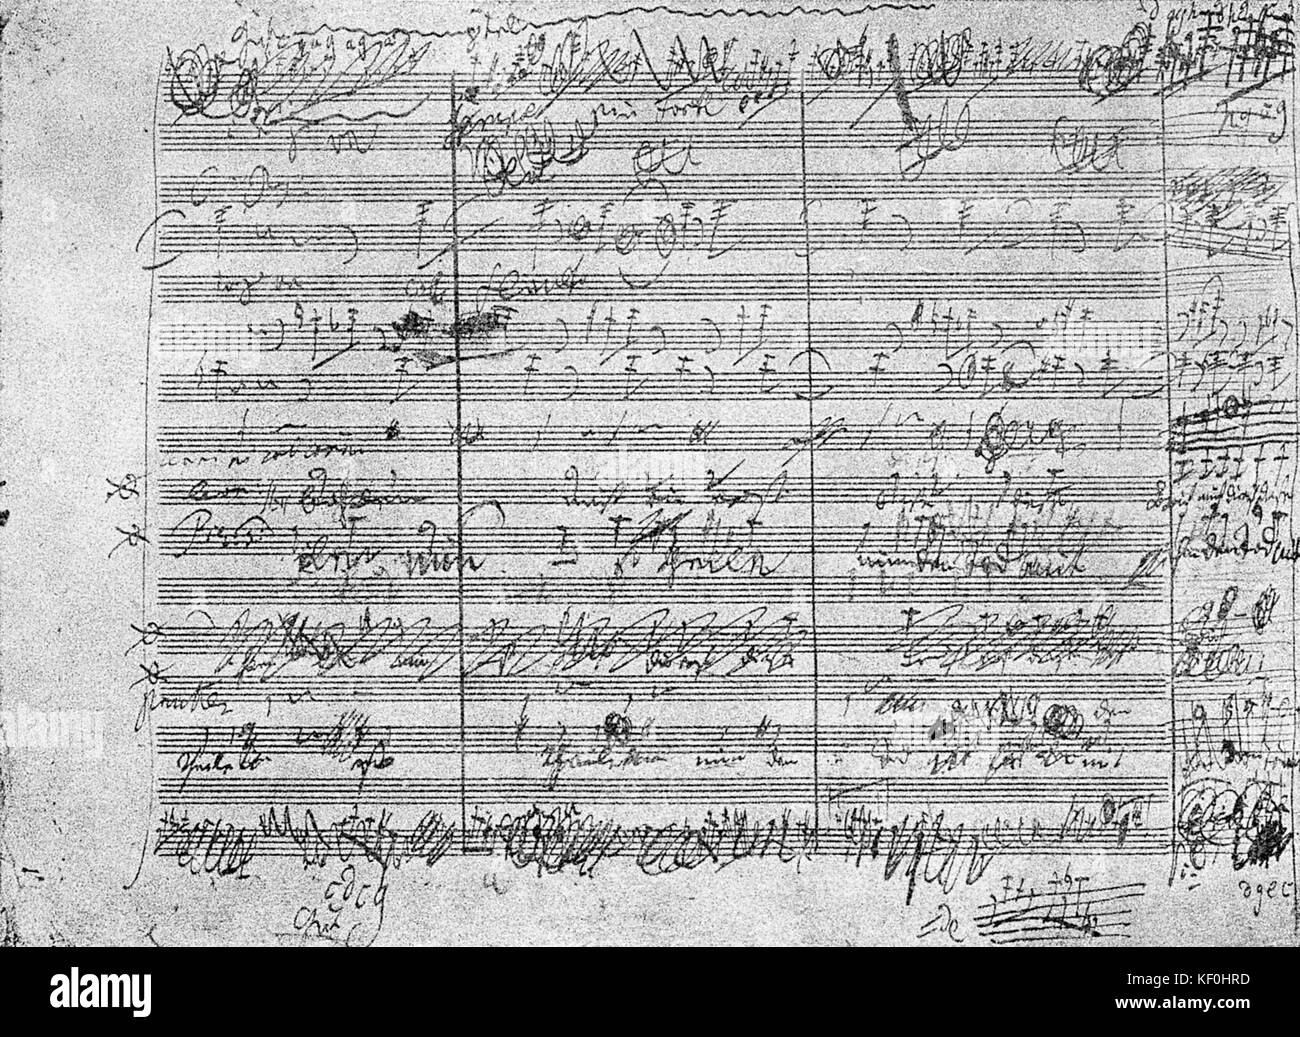 'Leonore' by Ludgwig van Beethoven.  Handwritten score  of the opera 'Fidelio, originally entitled 'Leonore', 1805.  LvB German composer 17 December 1770 - 26 March 1827 Stock Photo